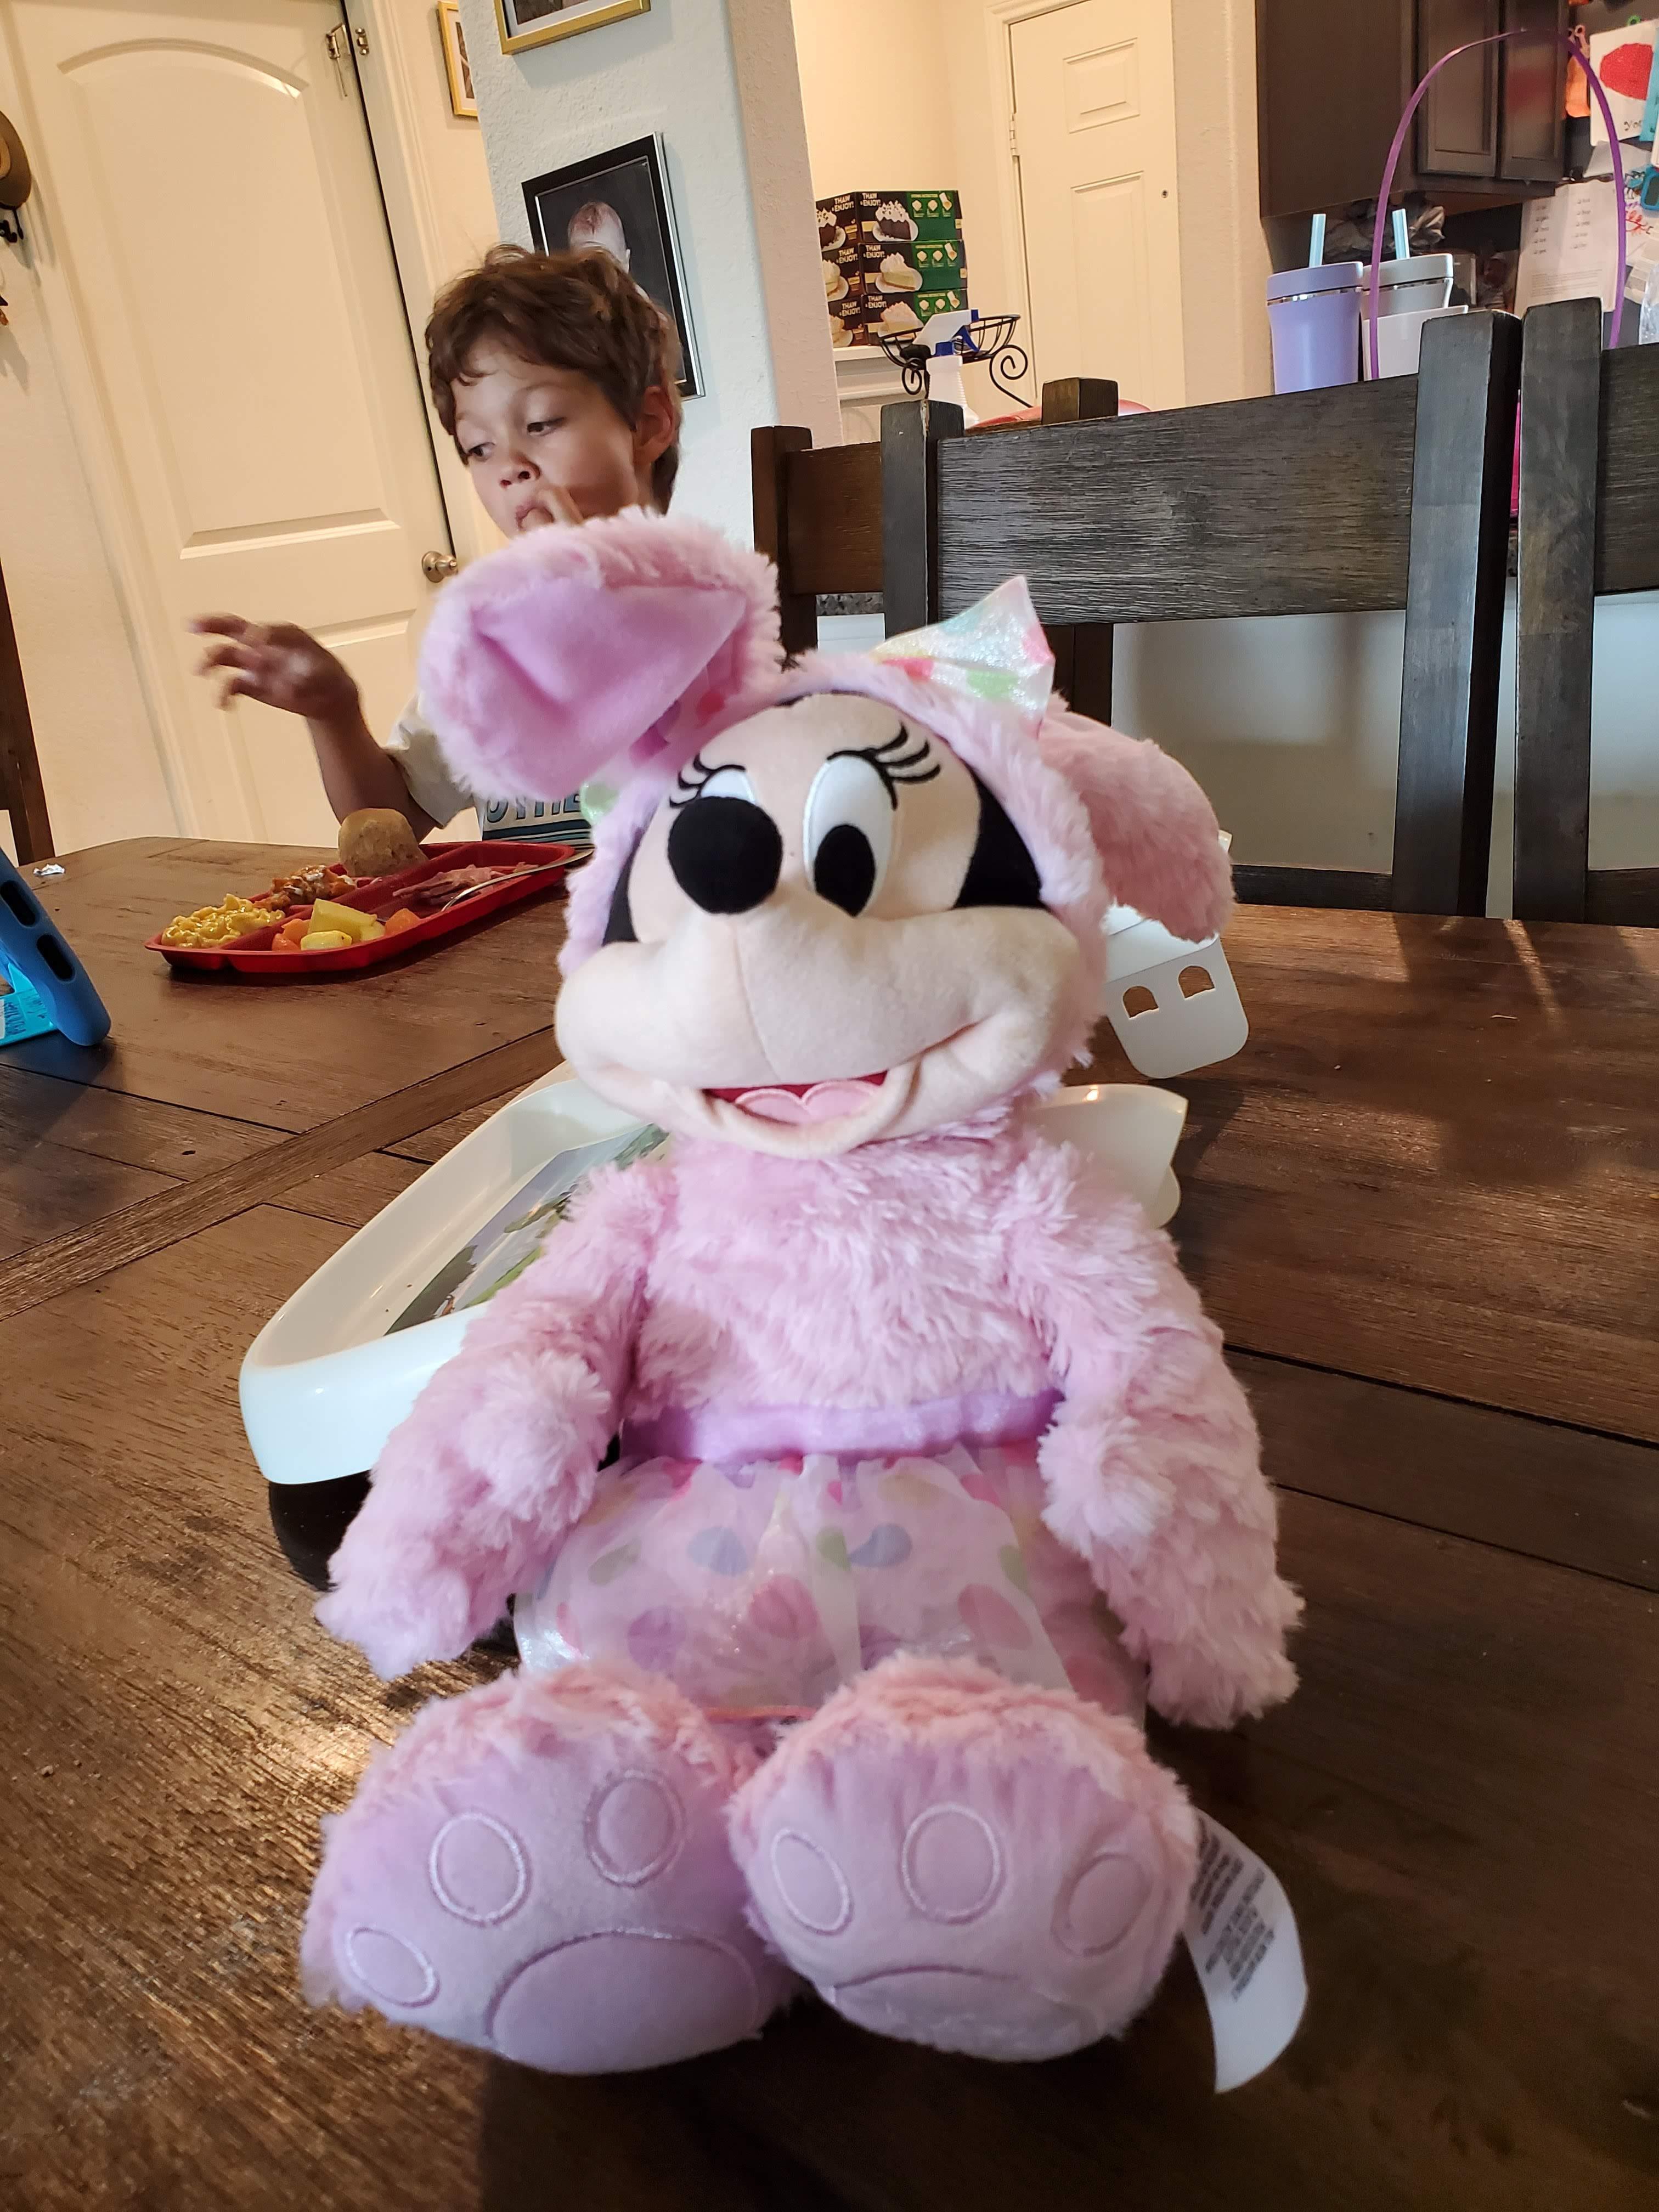 Stuffed doll. A pink bunny. Minnie Mouse face. Wearing a bow and tutu.